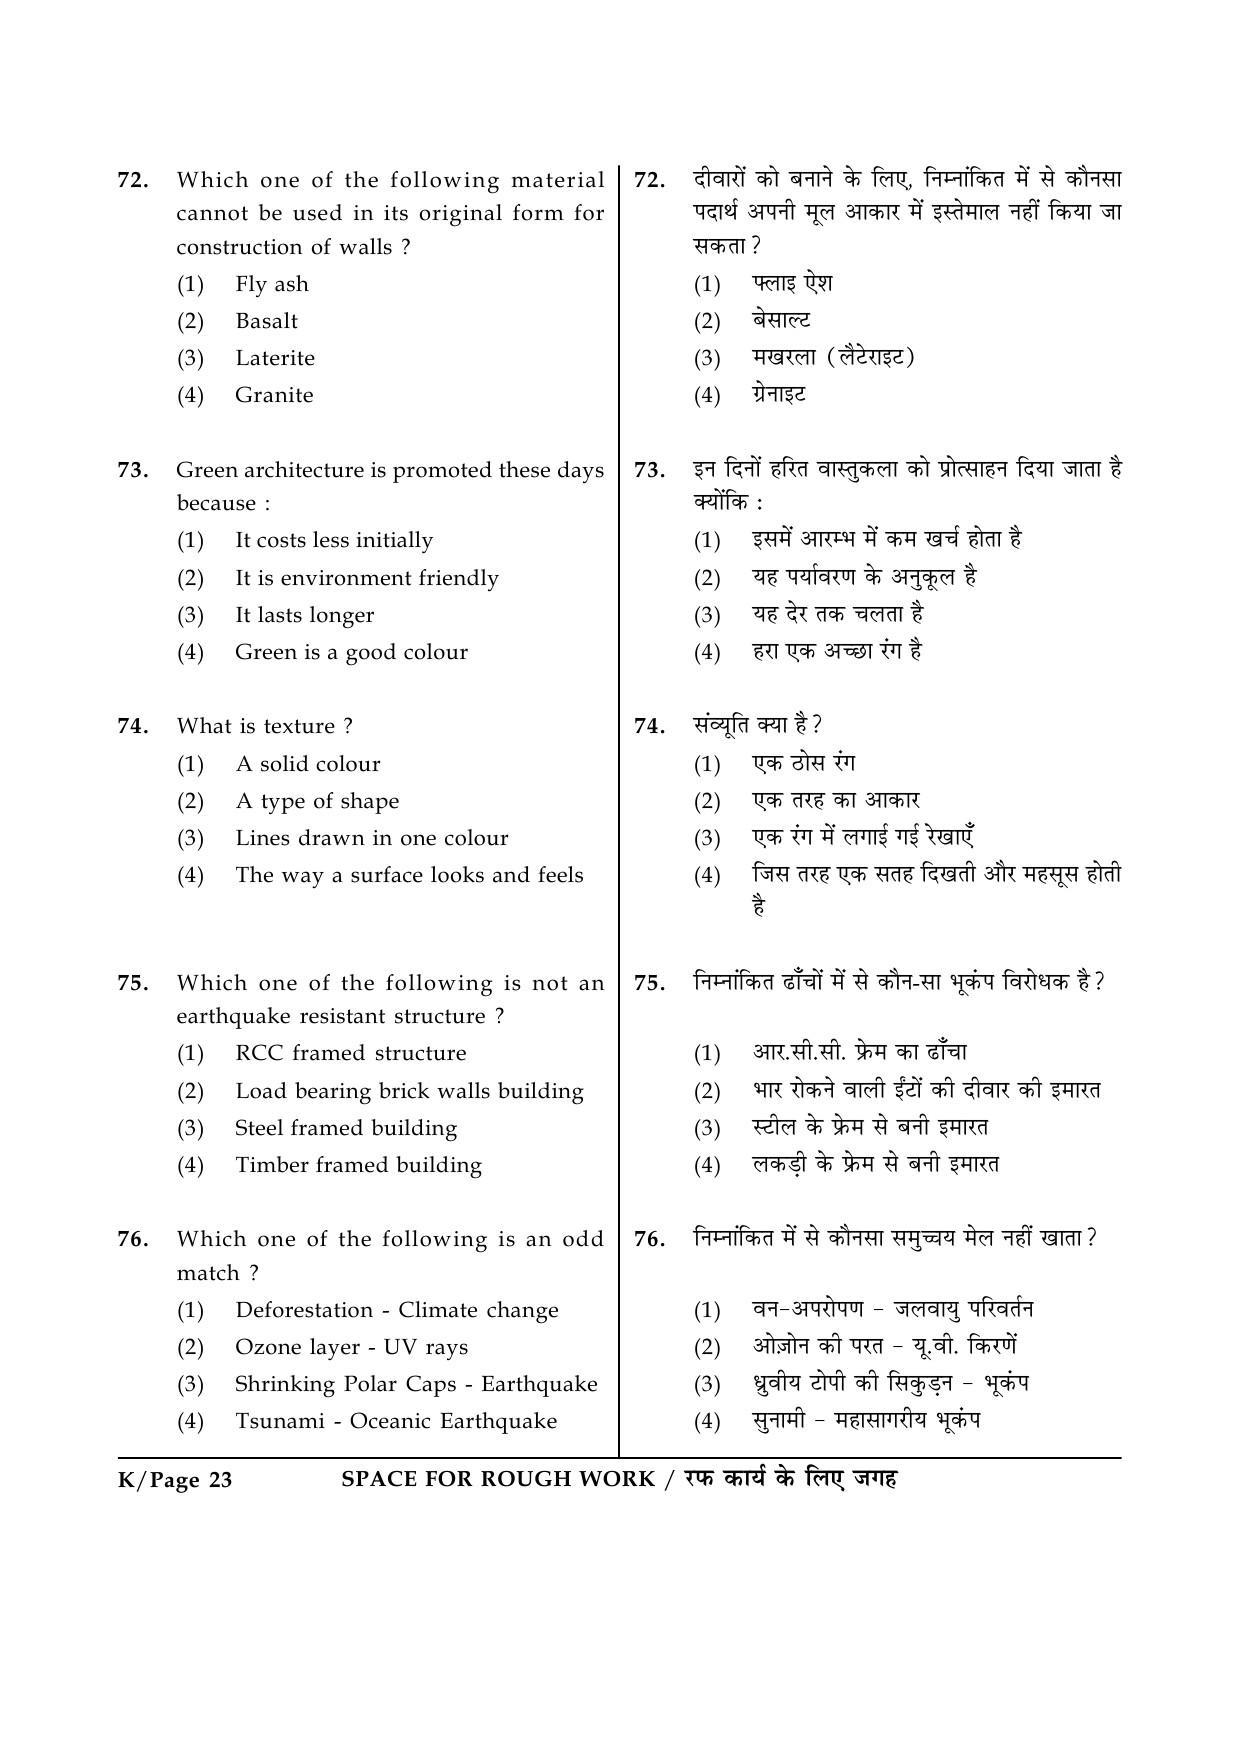 JEE Main Exam Question Paper 2015 Booklet K 23